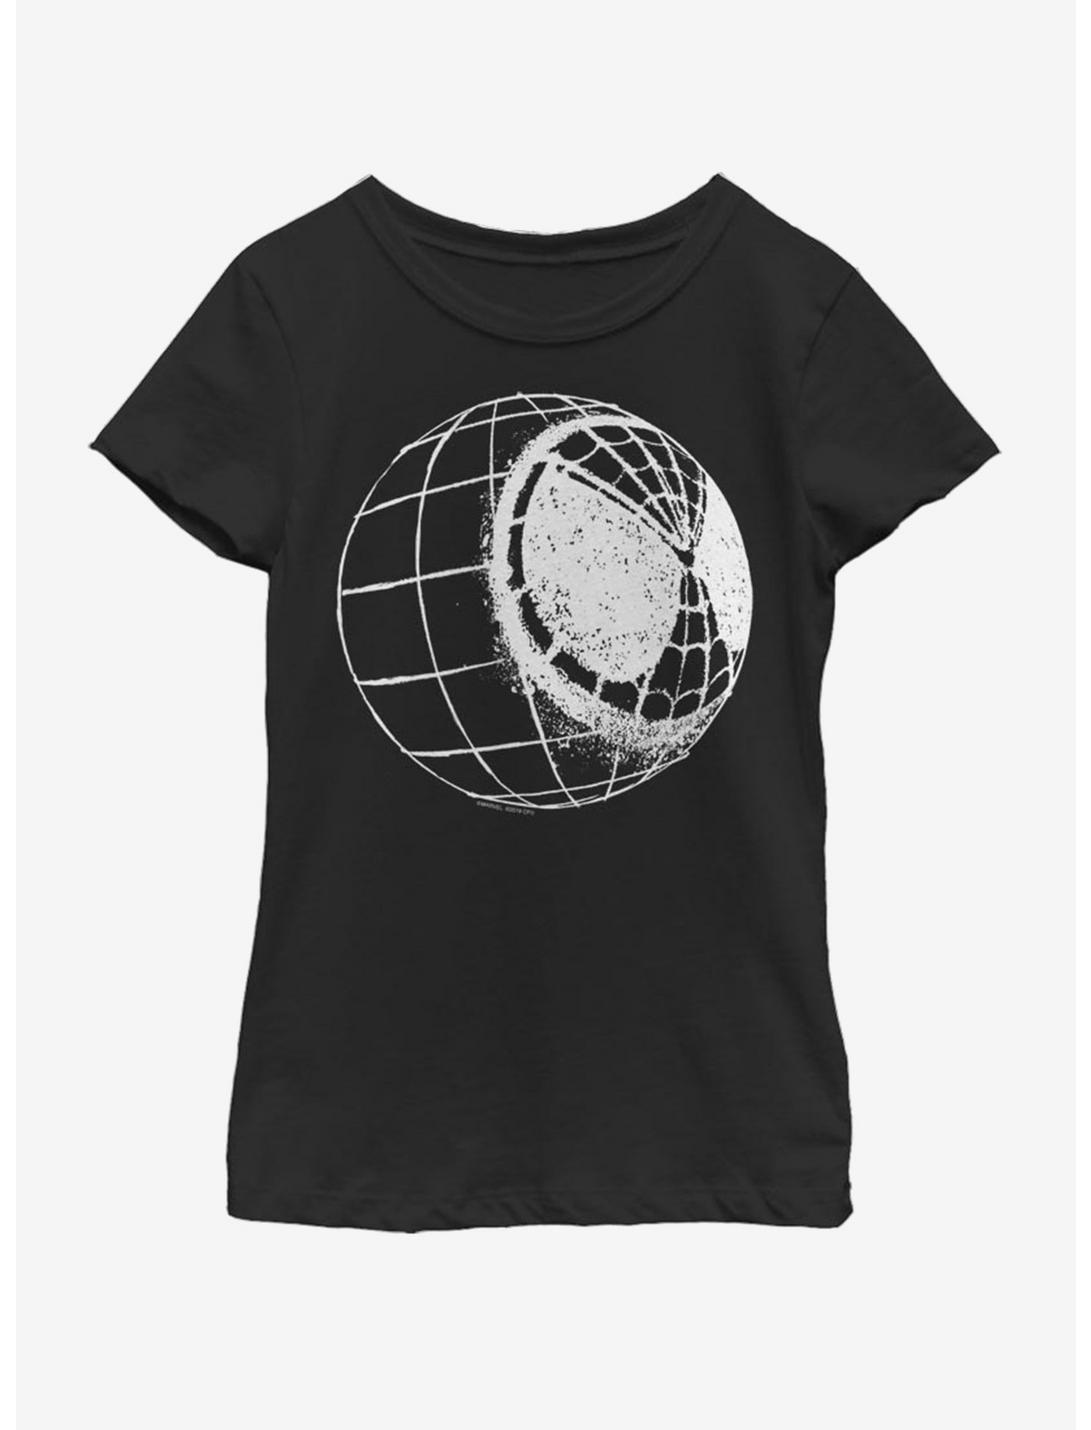 Marvel Spiderman Far From Home Spider-Man Globe Youth Girls T-Shirt, BLACK, hi-res